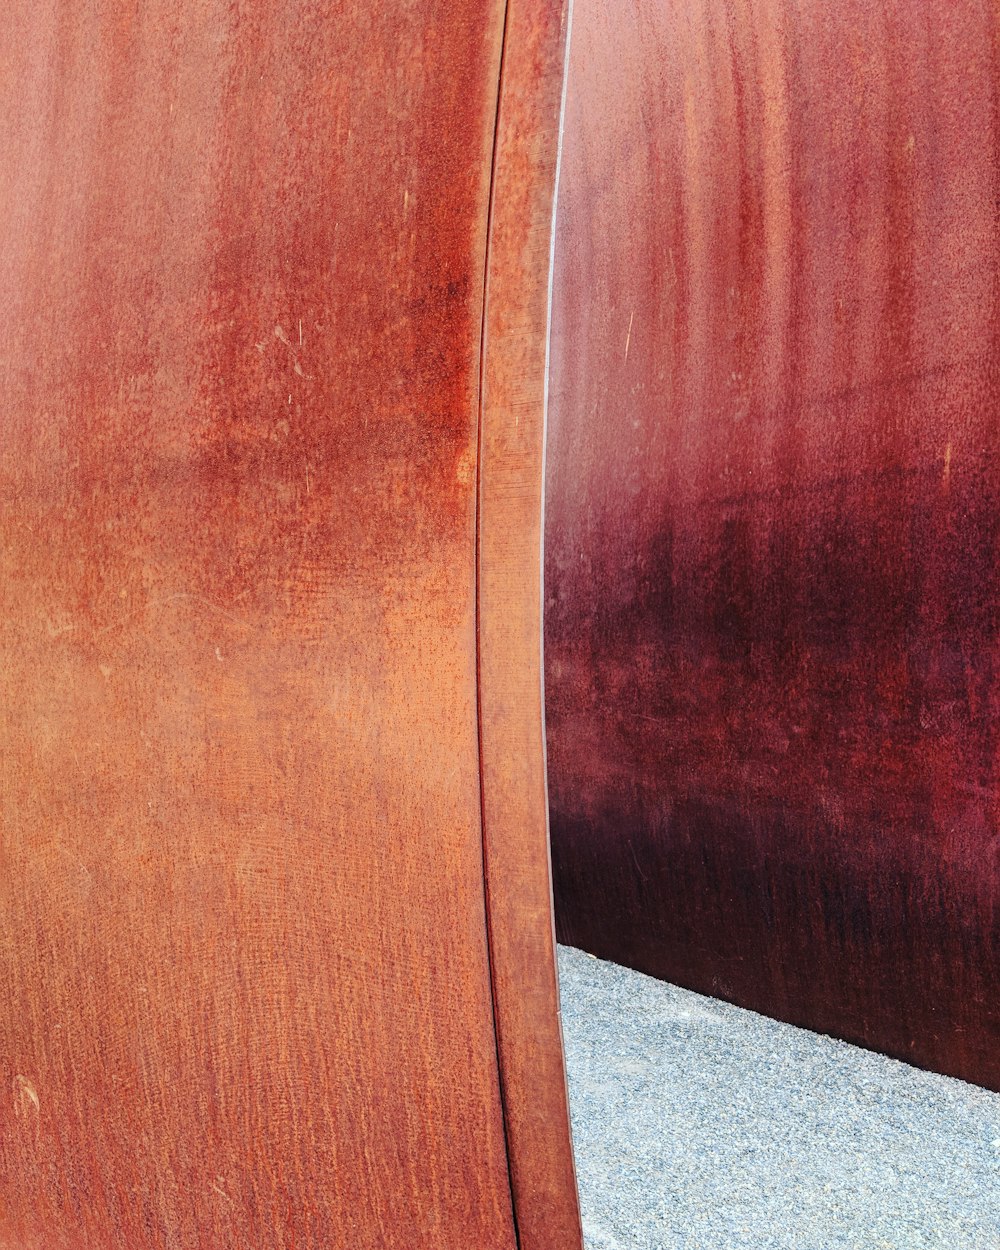 brown wooden surface